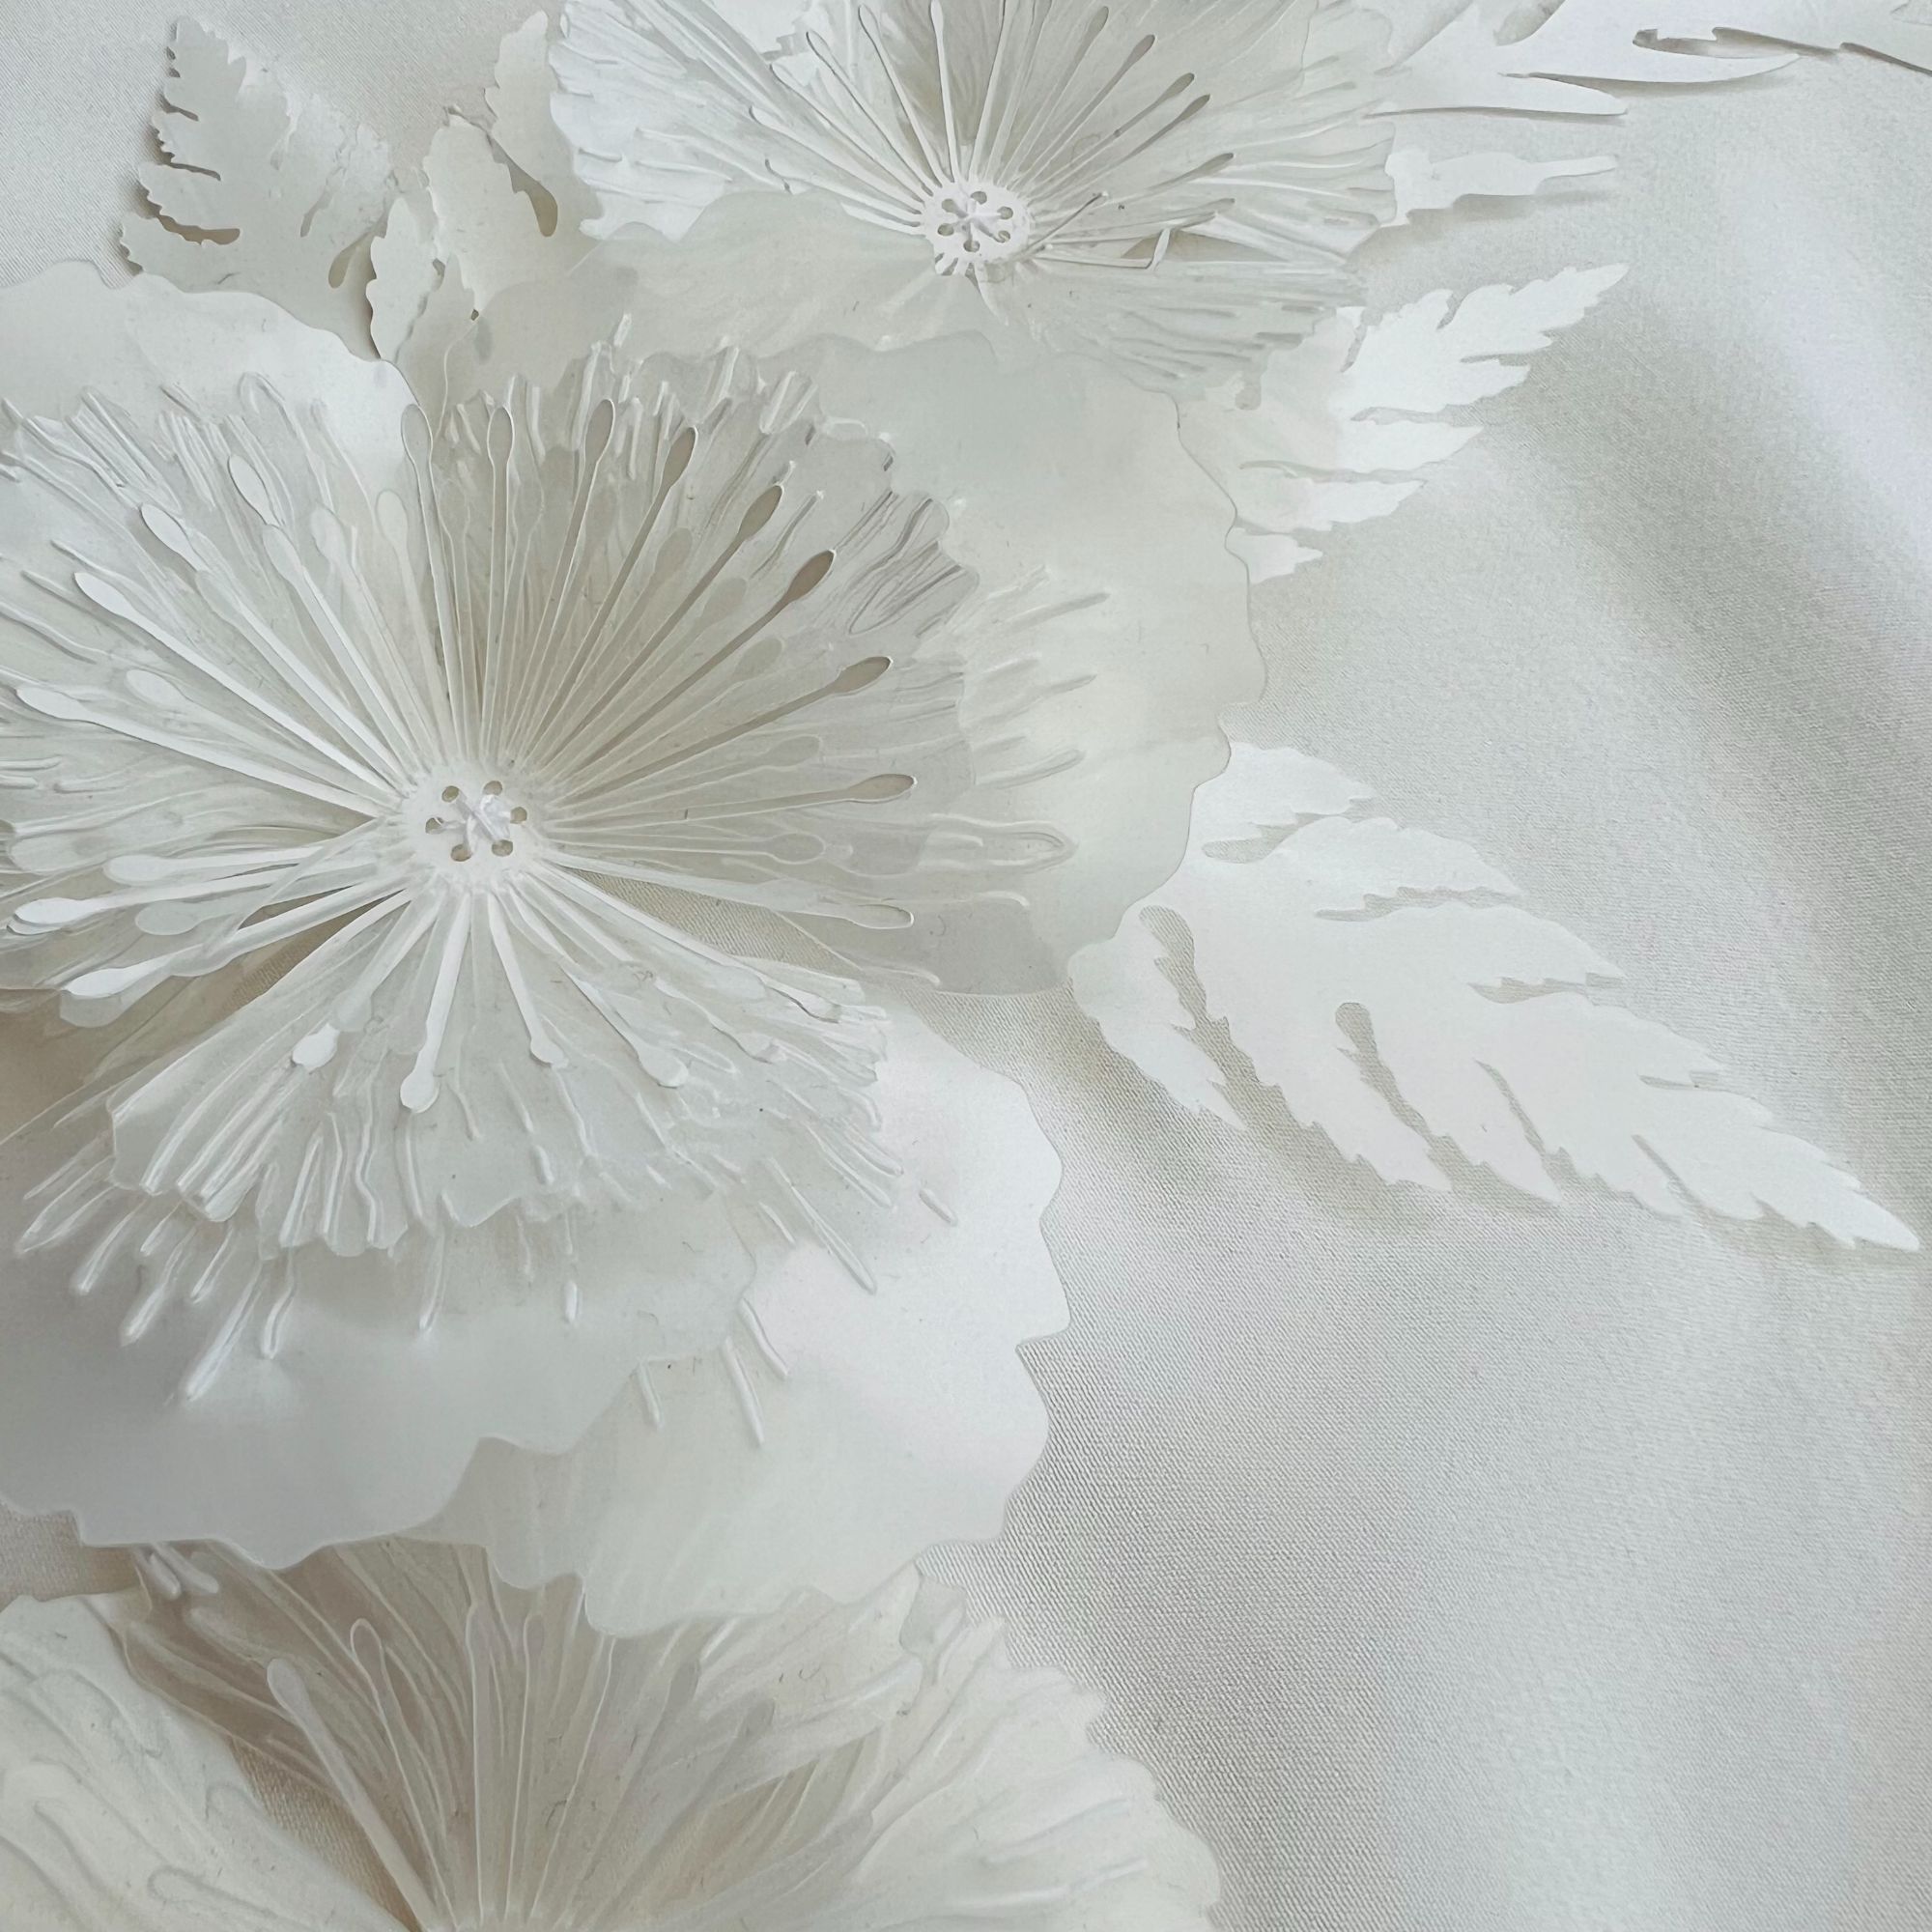 Delicate white flower sequins made from biobased, biodegradable polymer plastic